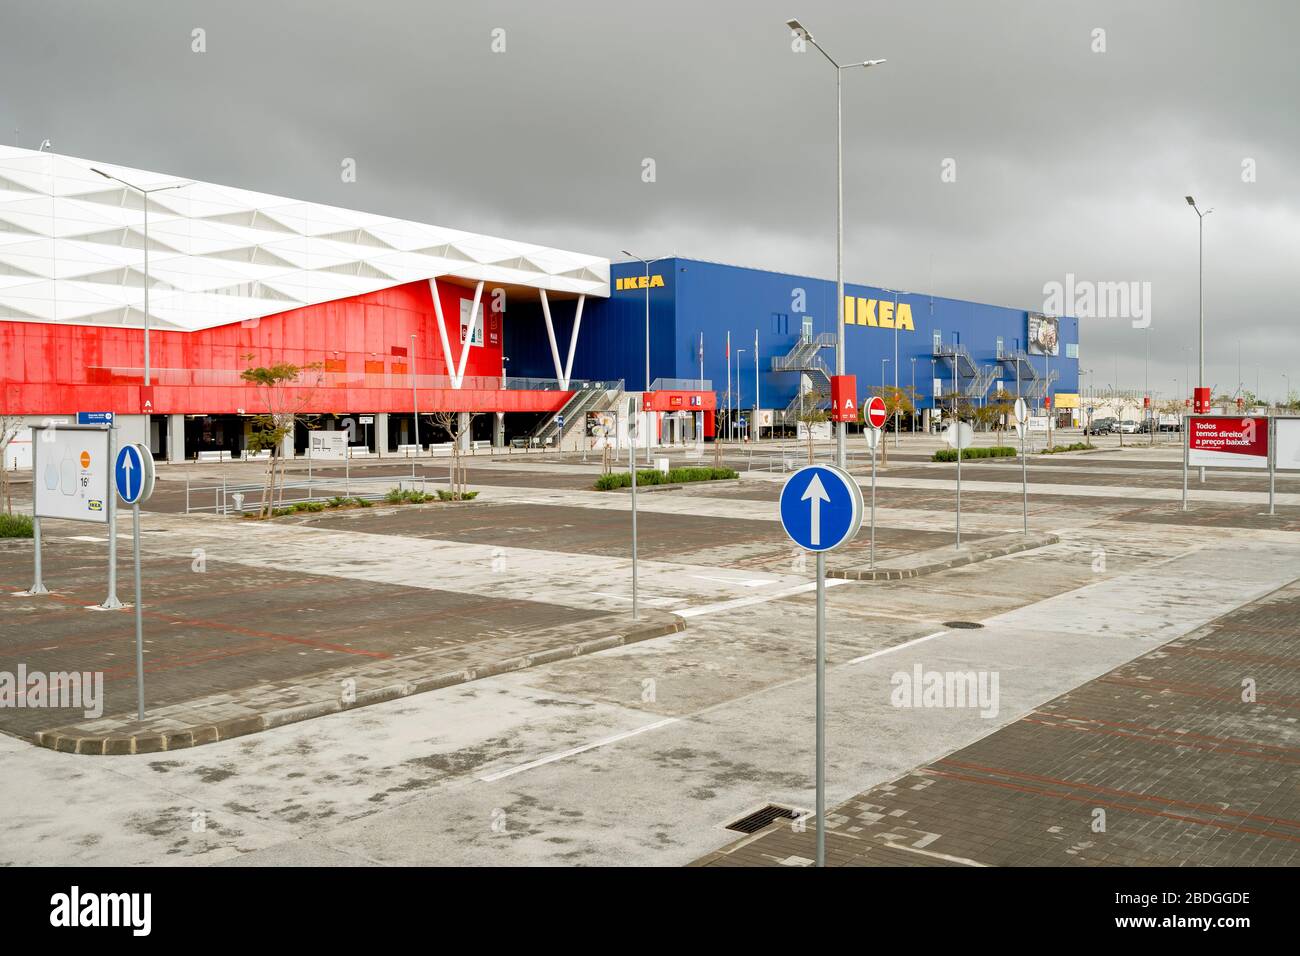 Faro, Portugal - April 7, 2020: Empty parking lot in front of the biggest  shopping mall in Algarve - MAR Shopping Mall, Designer Outlet and Ikea -  due Stock Photo - Alamy